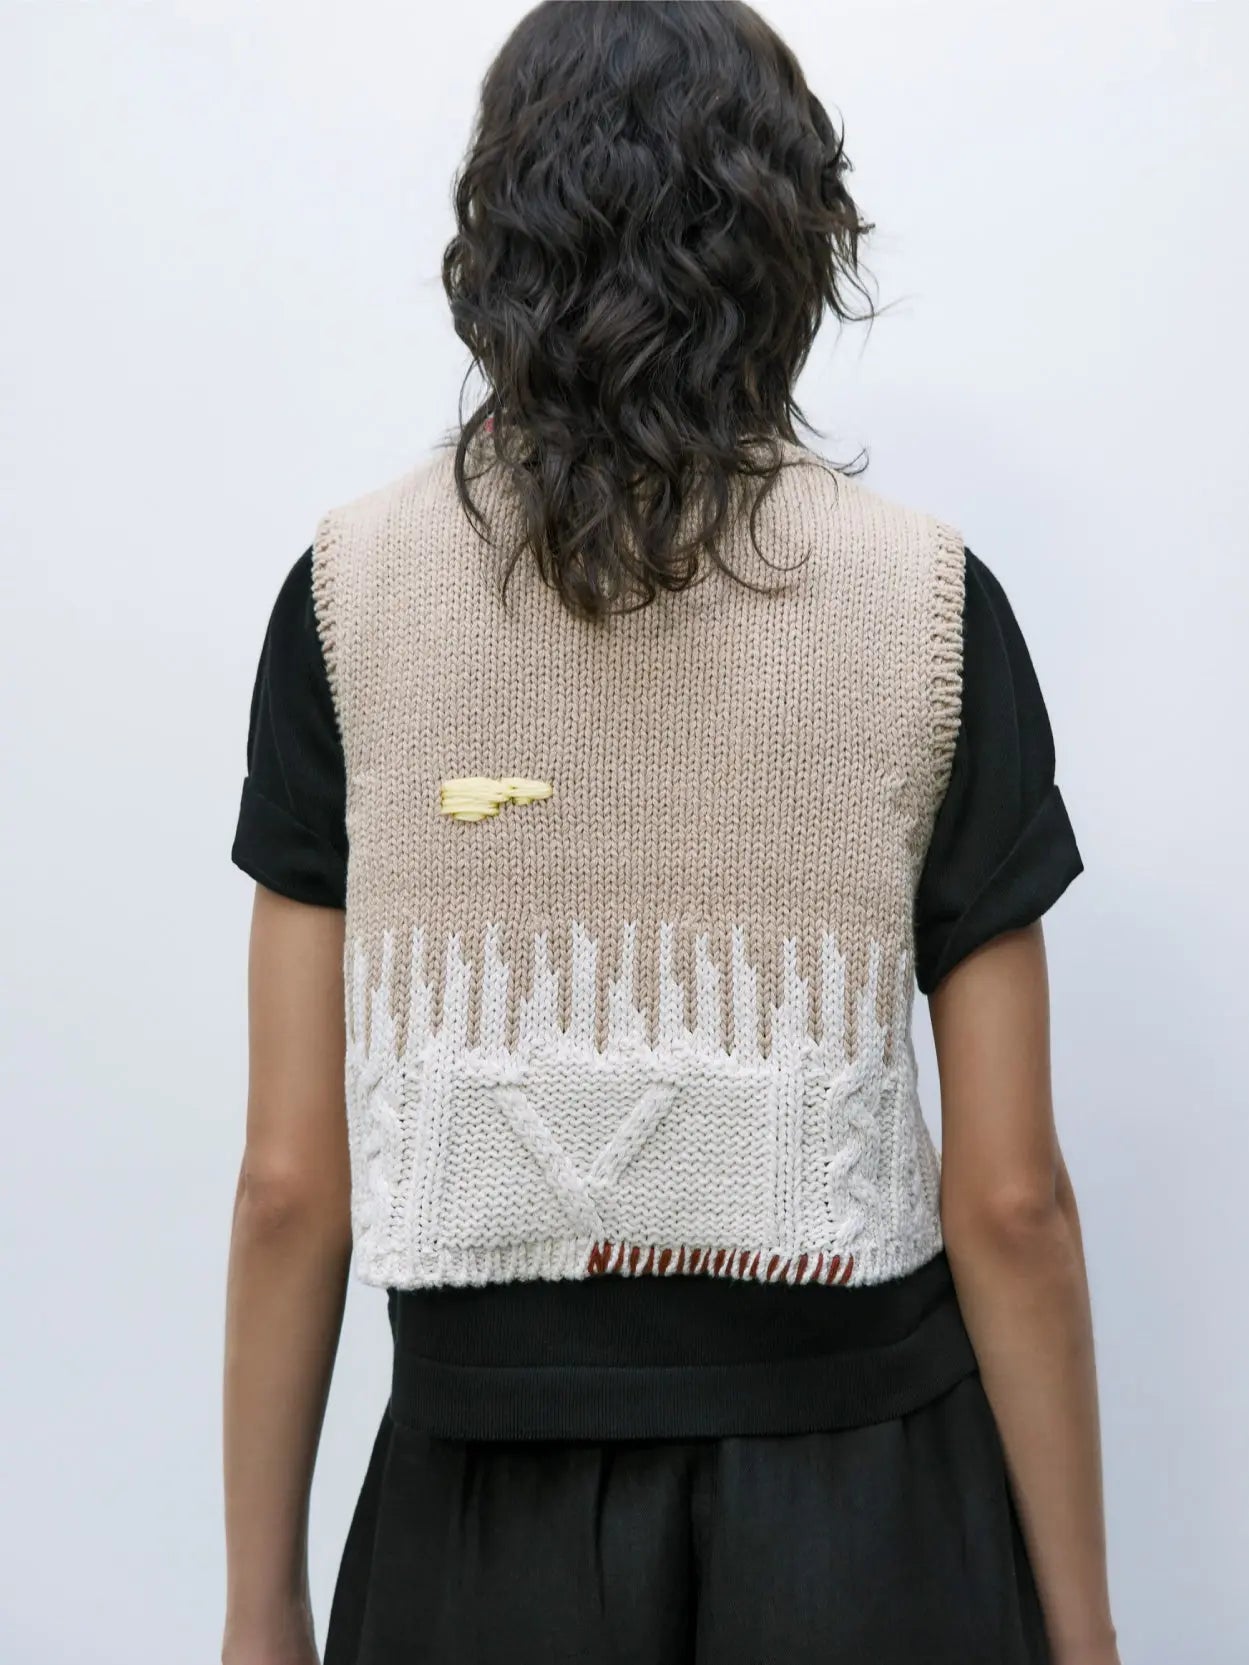 A beige knitted sleeveless vest with a textured pattern, perfect for adding a touch of Barcelona flair to your wardrobe. The upper part is plain, while the lower part features white knitted designs resembling drips. Small, colorful abstract shapes are scattered on the vest, available exclusively at Bassalstore as the Cotton Embroidered Top by Cordera.